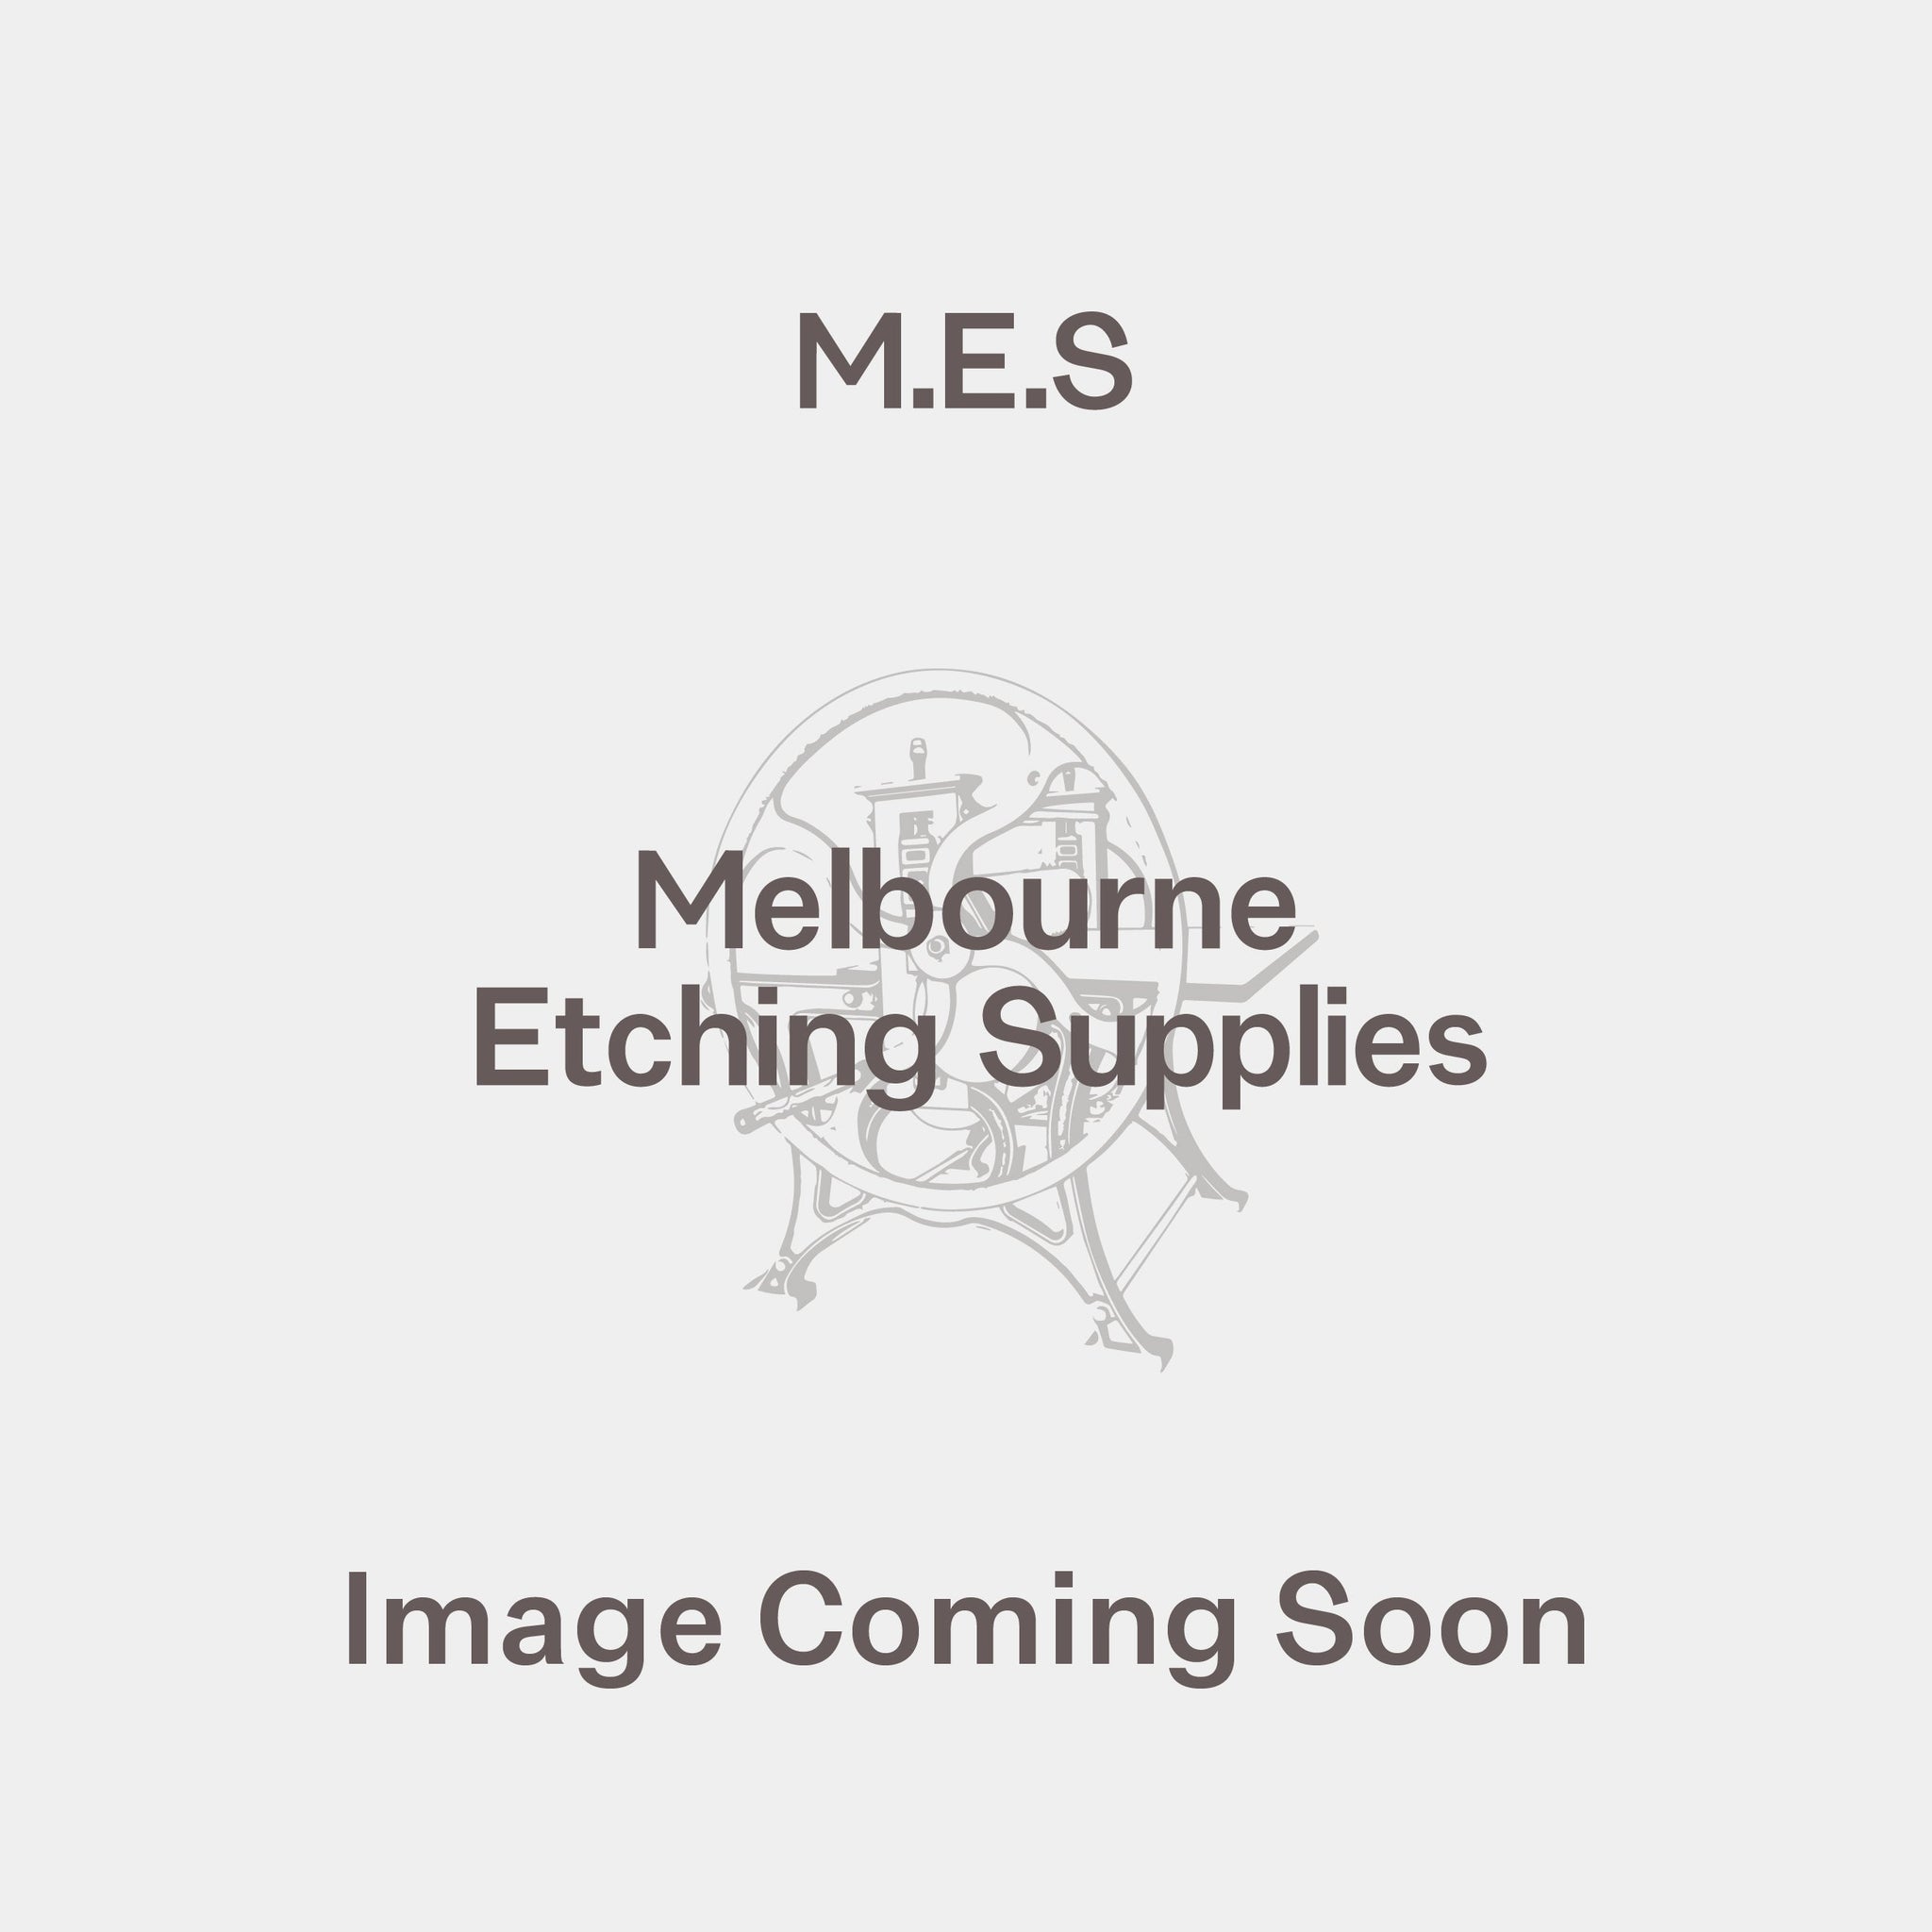 Wooden Palette 5mm thick - Melbourne Etching Supplies